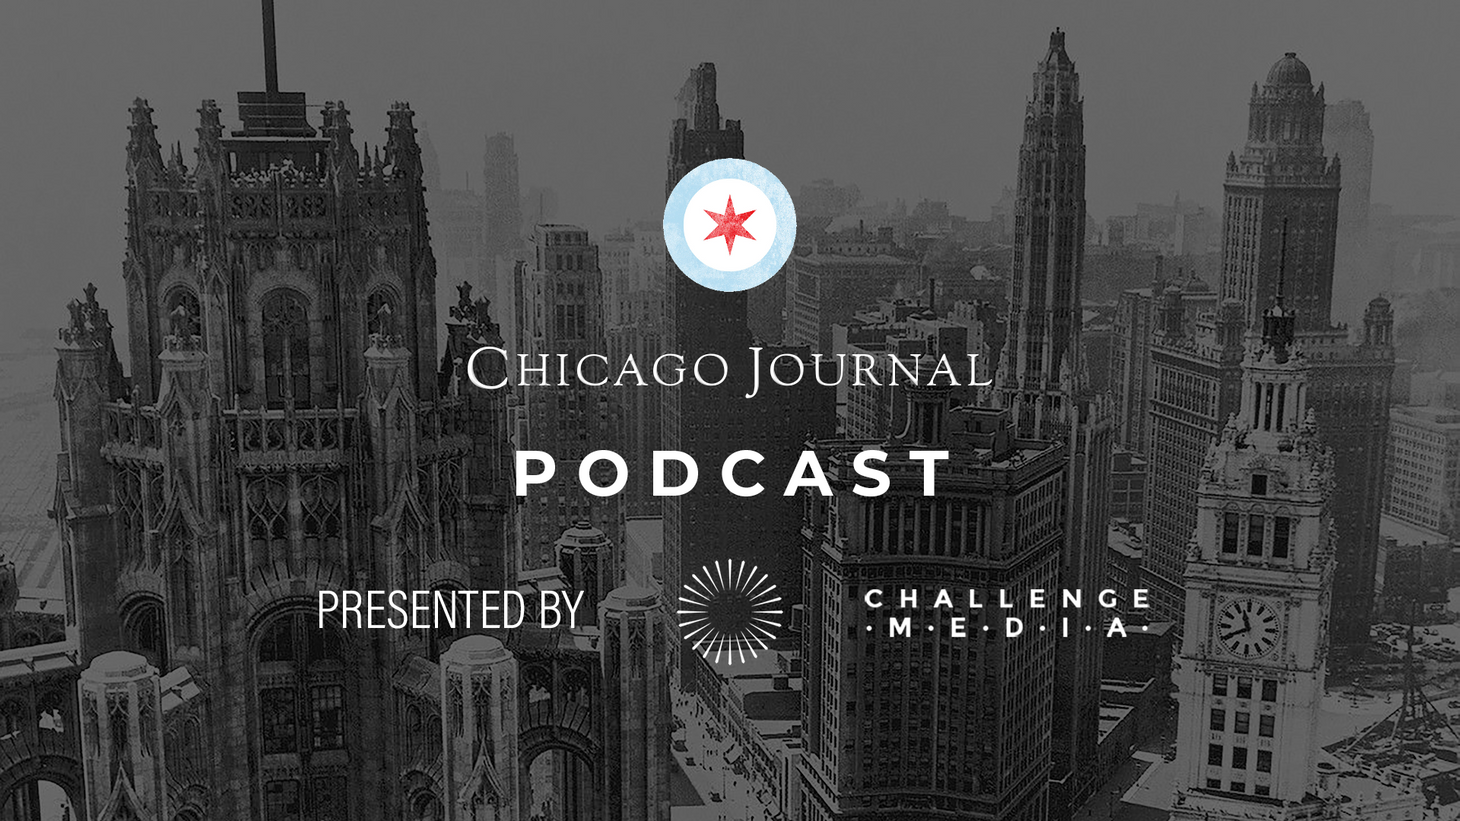 Chicago Journal Podcast: Brief Introduction